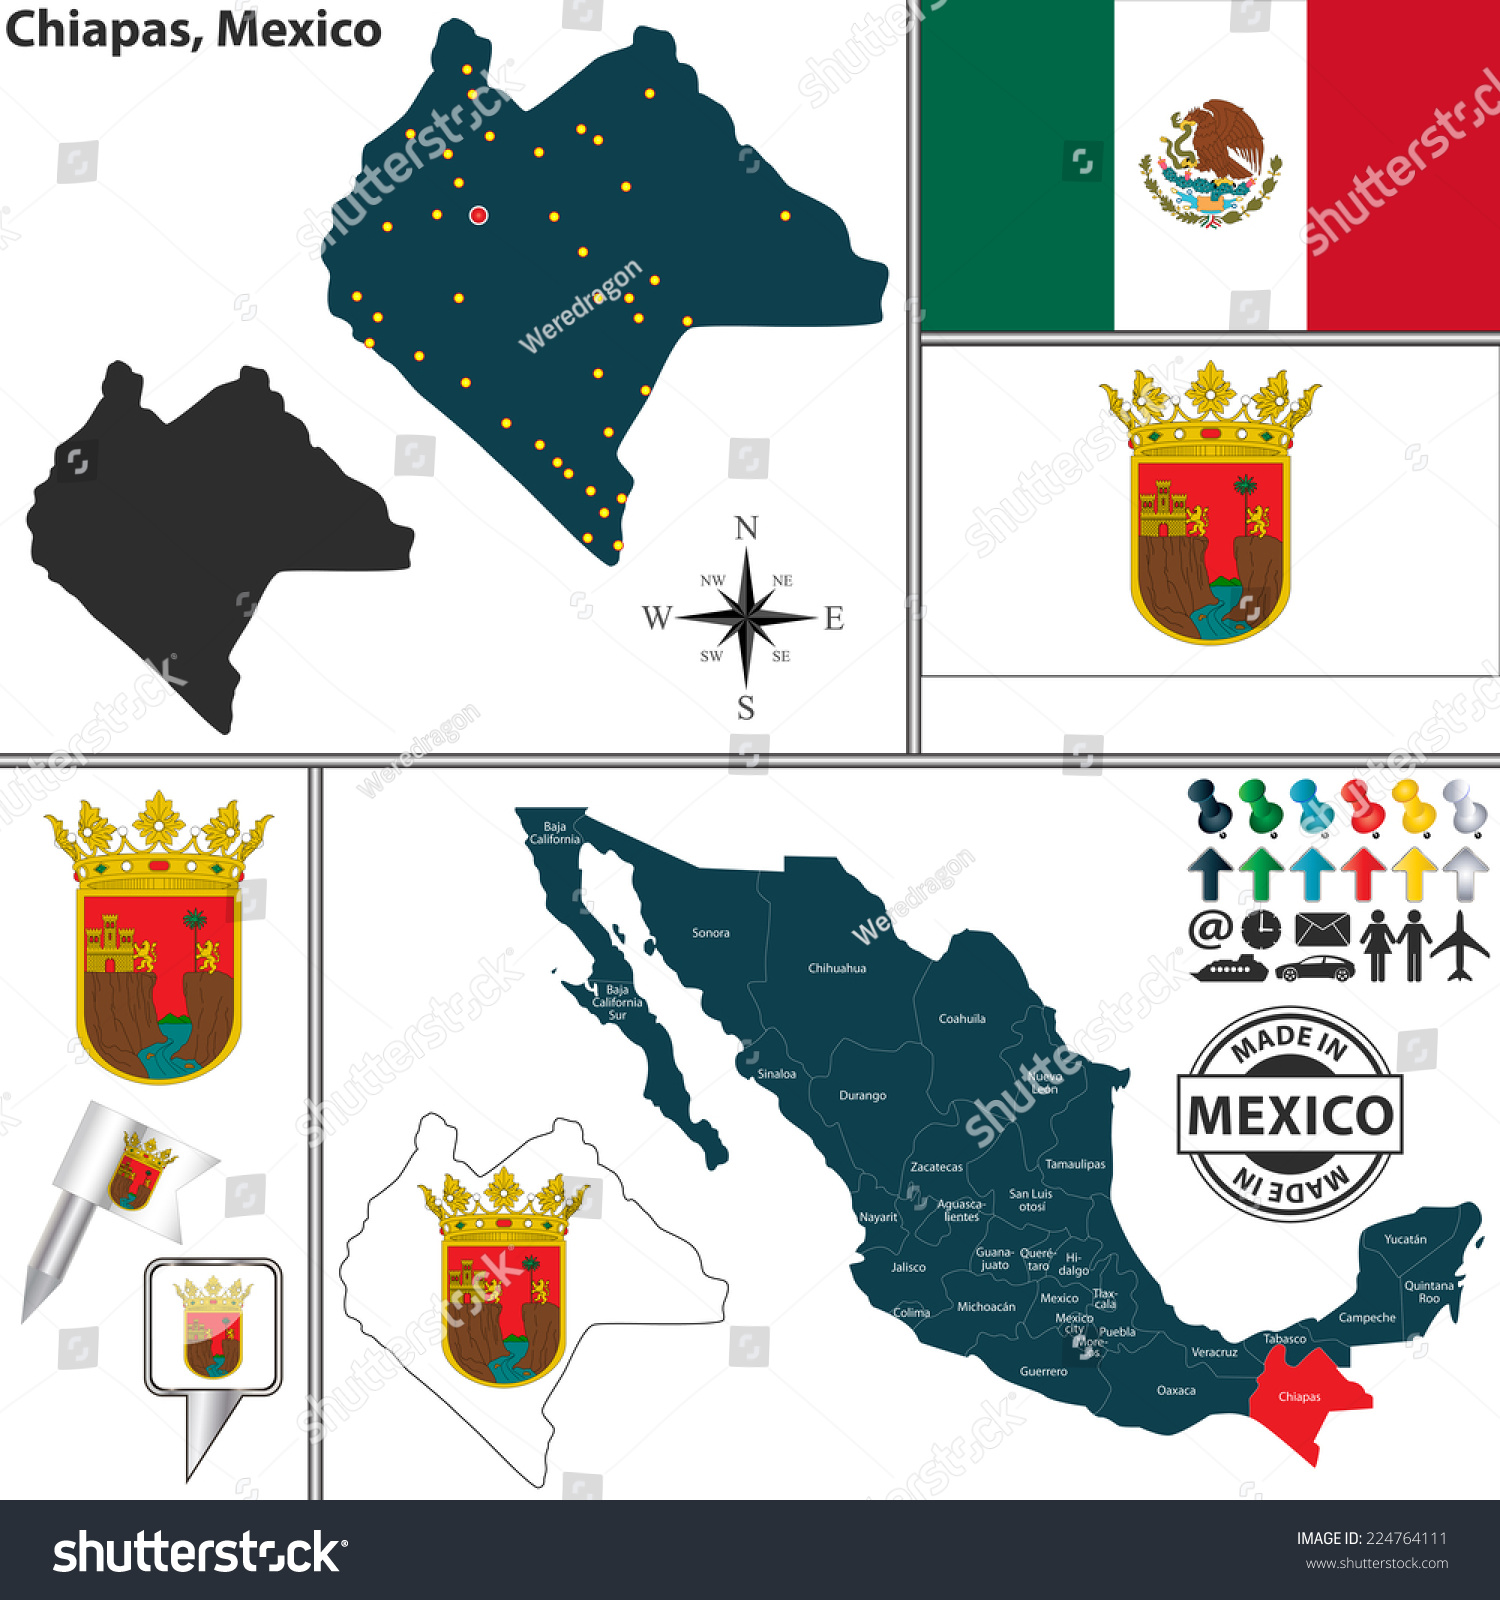 Vector Map Of State Chiapas With Coat Of Arms Royalty Free Stock Vector 224764111 8524